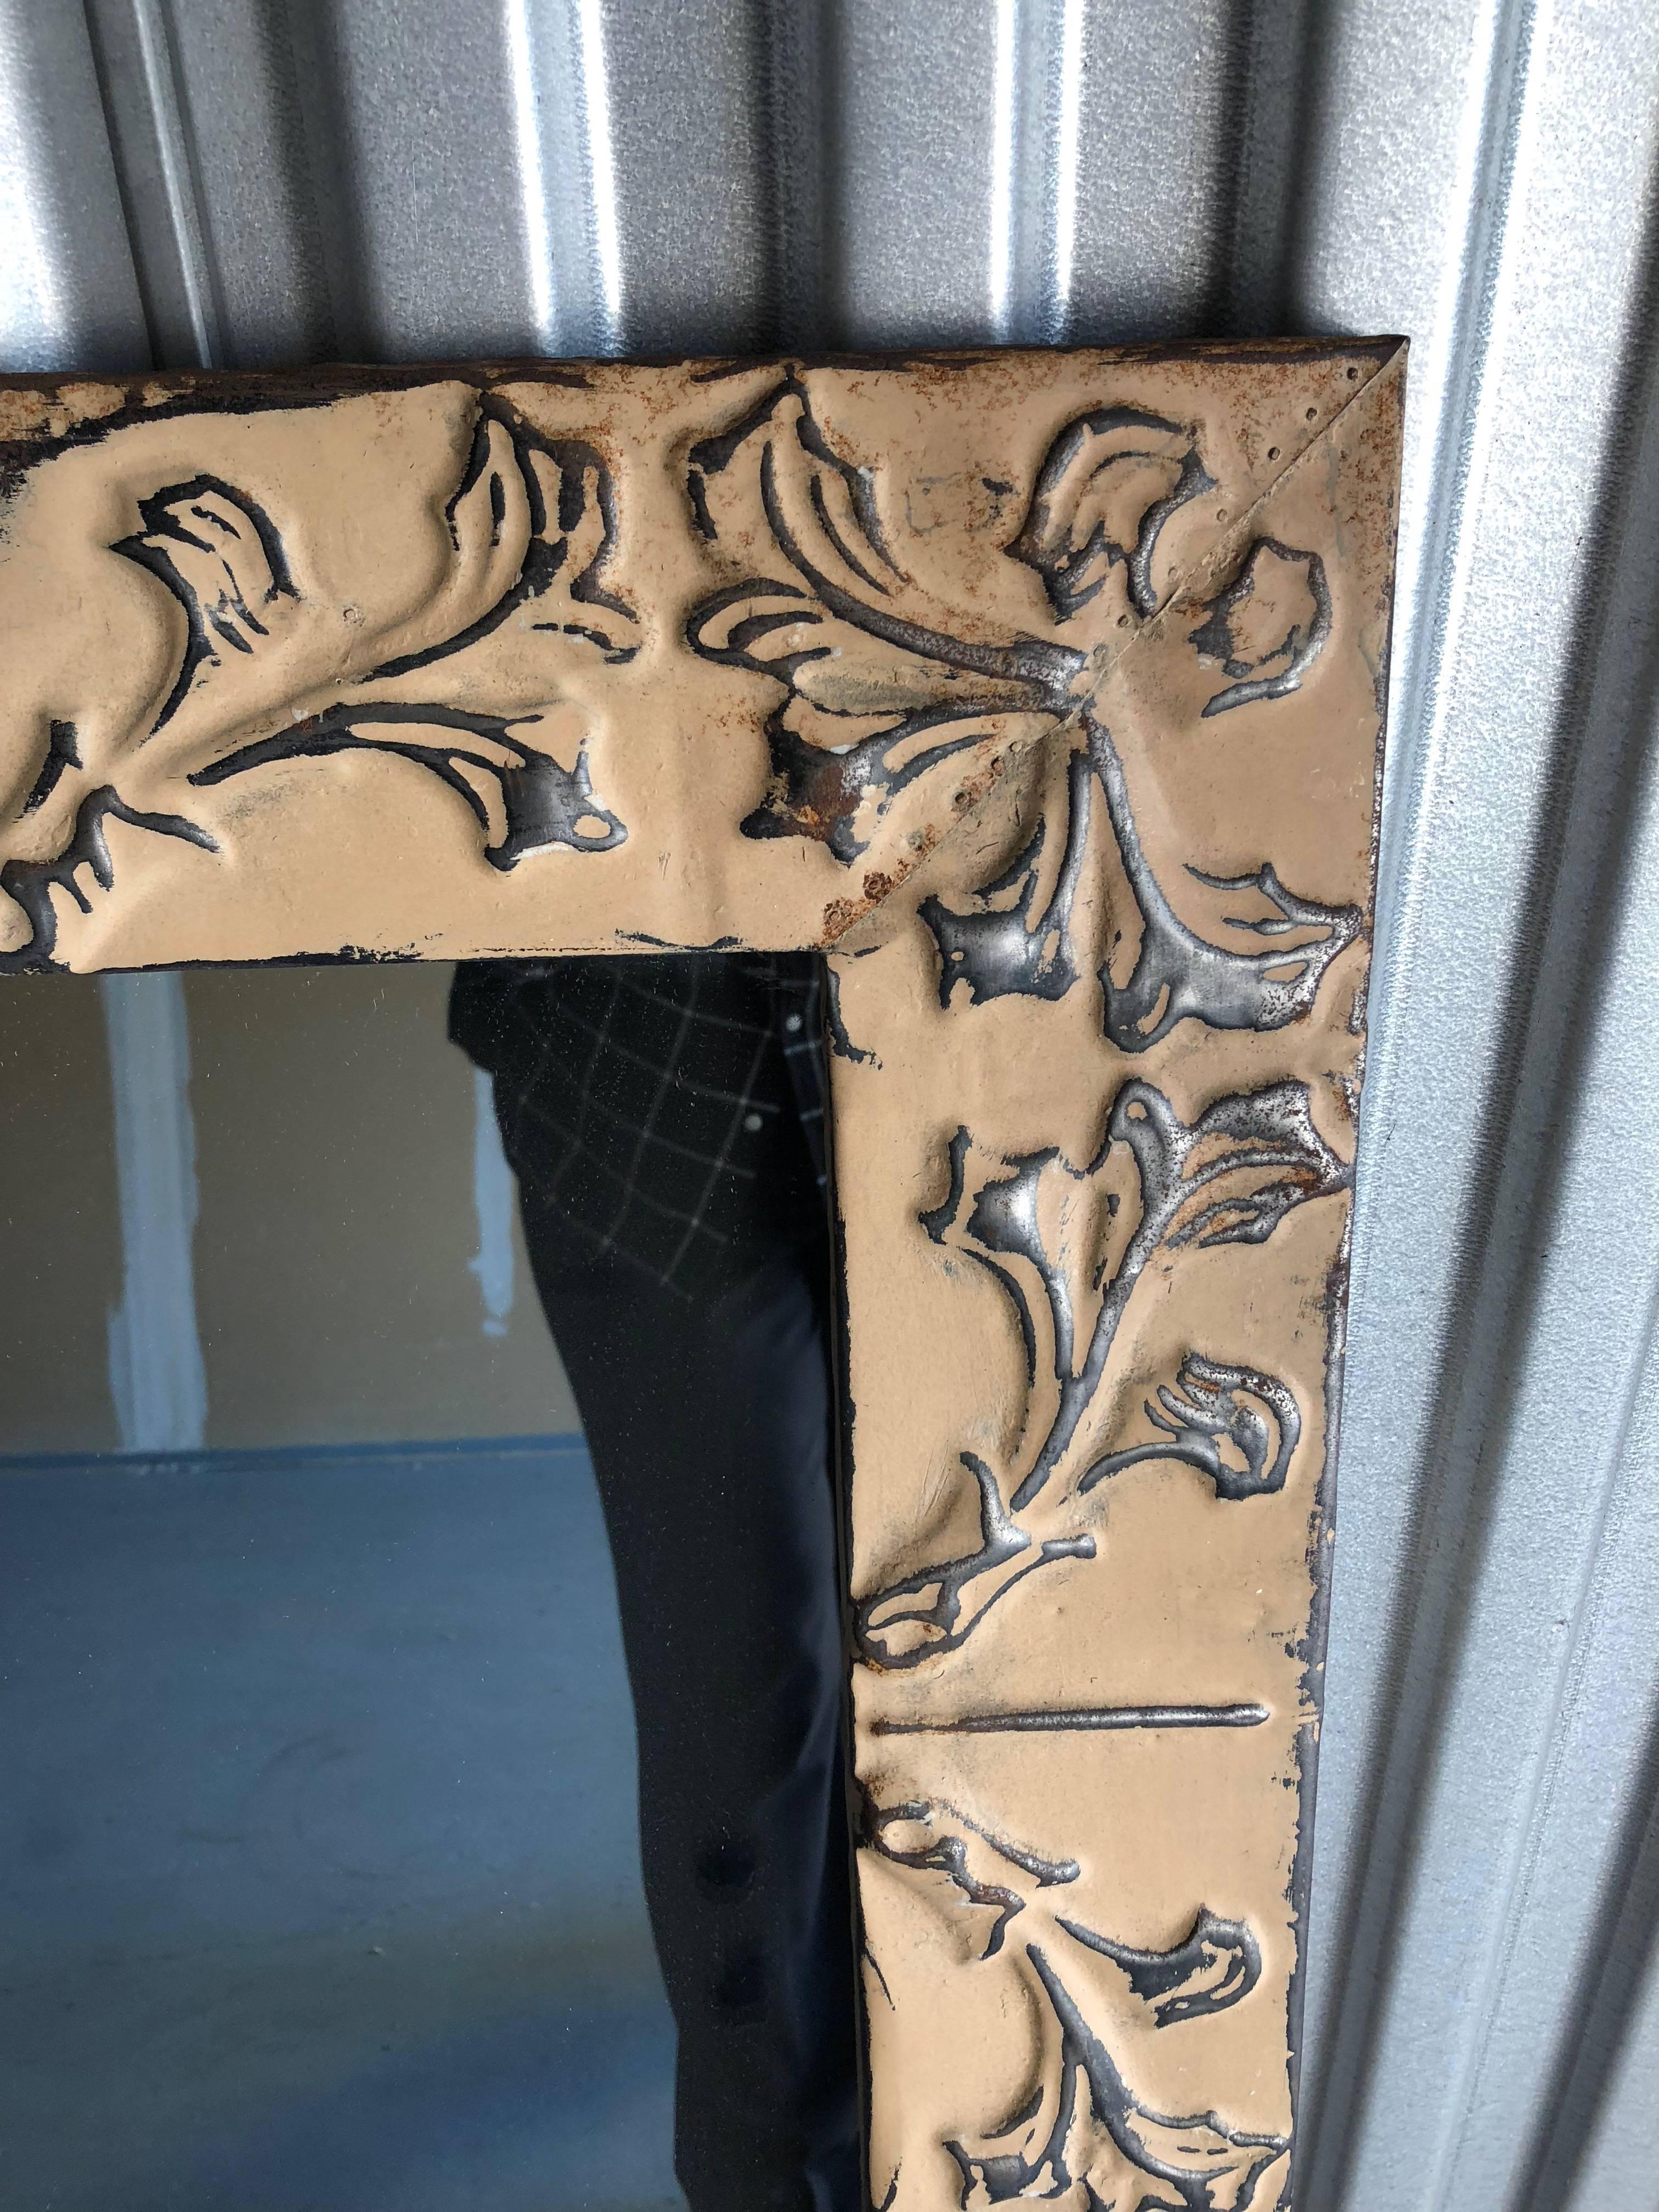 Well made mirror made from old ceiling tile frame with insert of very good mirror hang up or sideways!